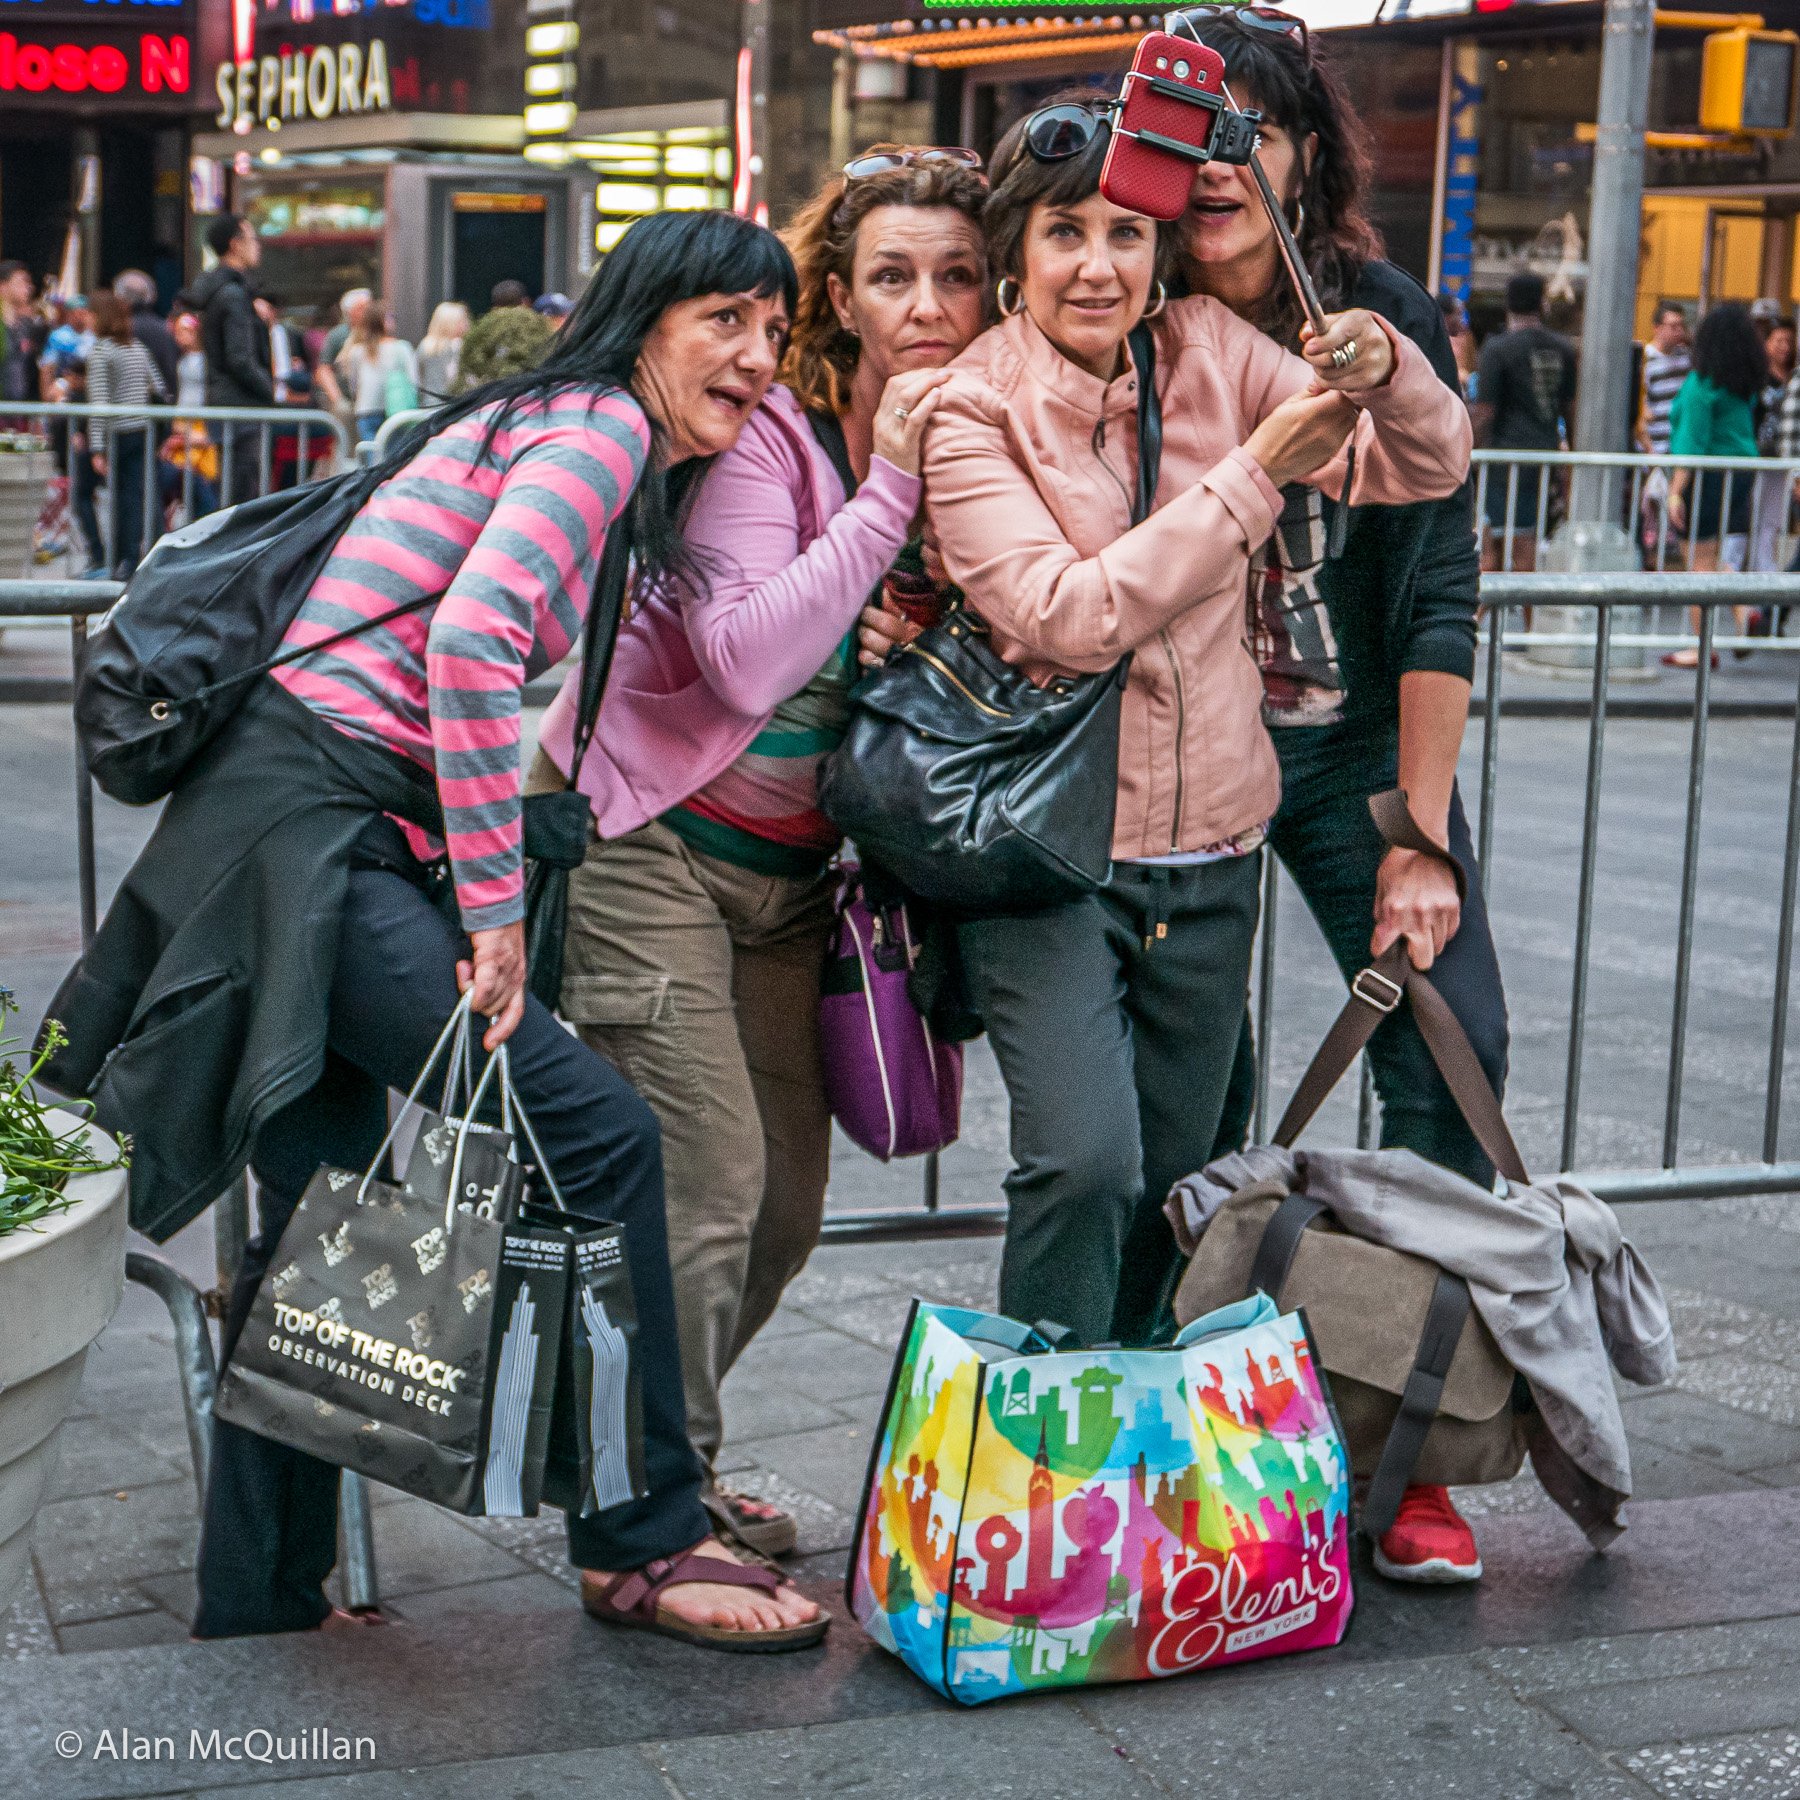 Times Square, New York City, 2015